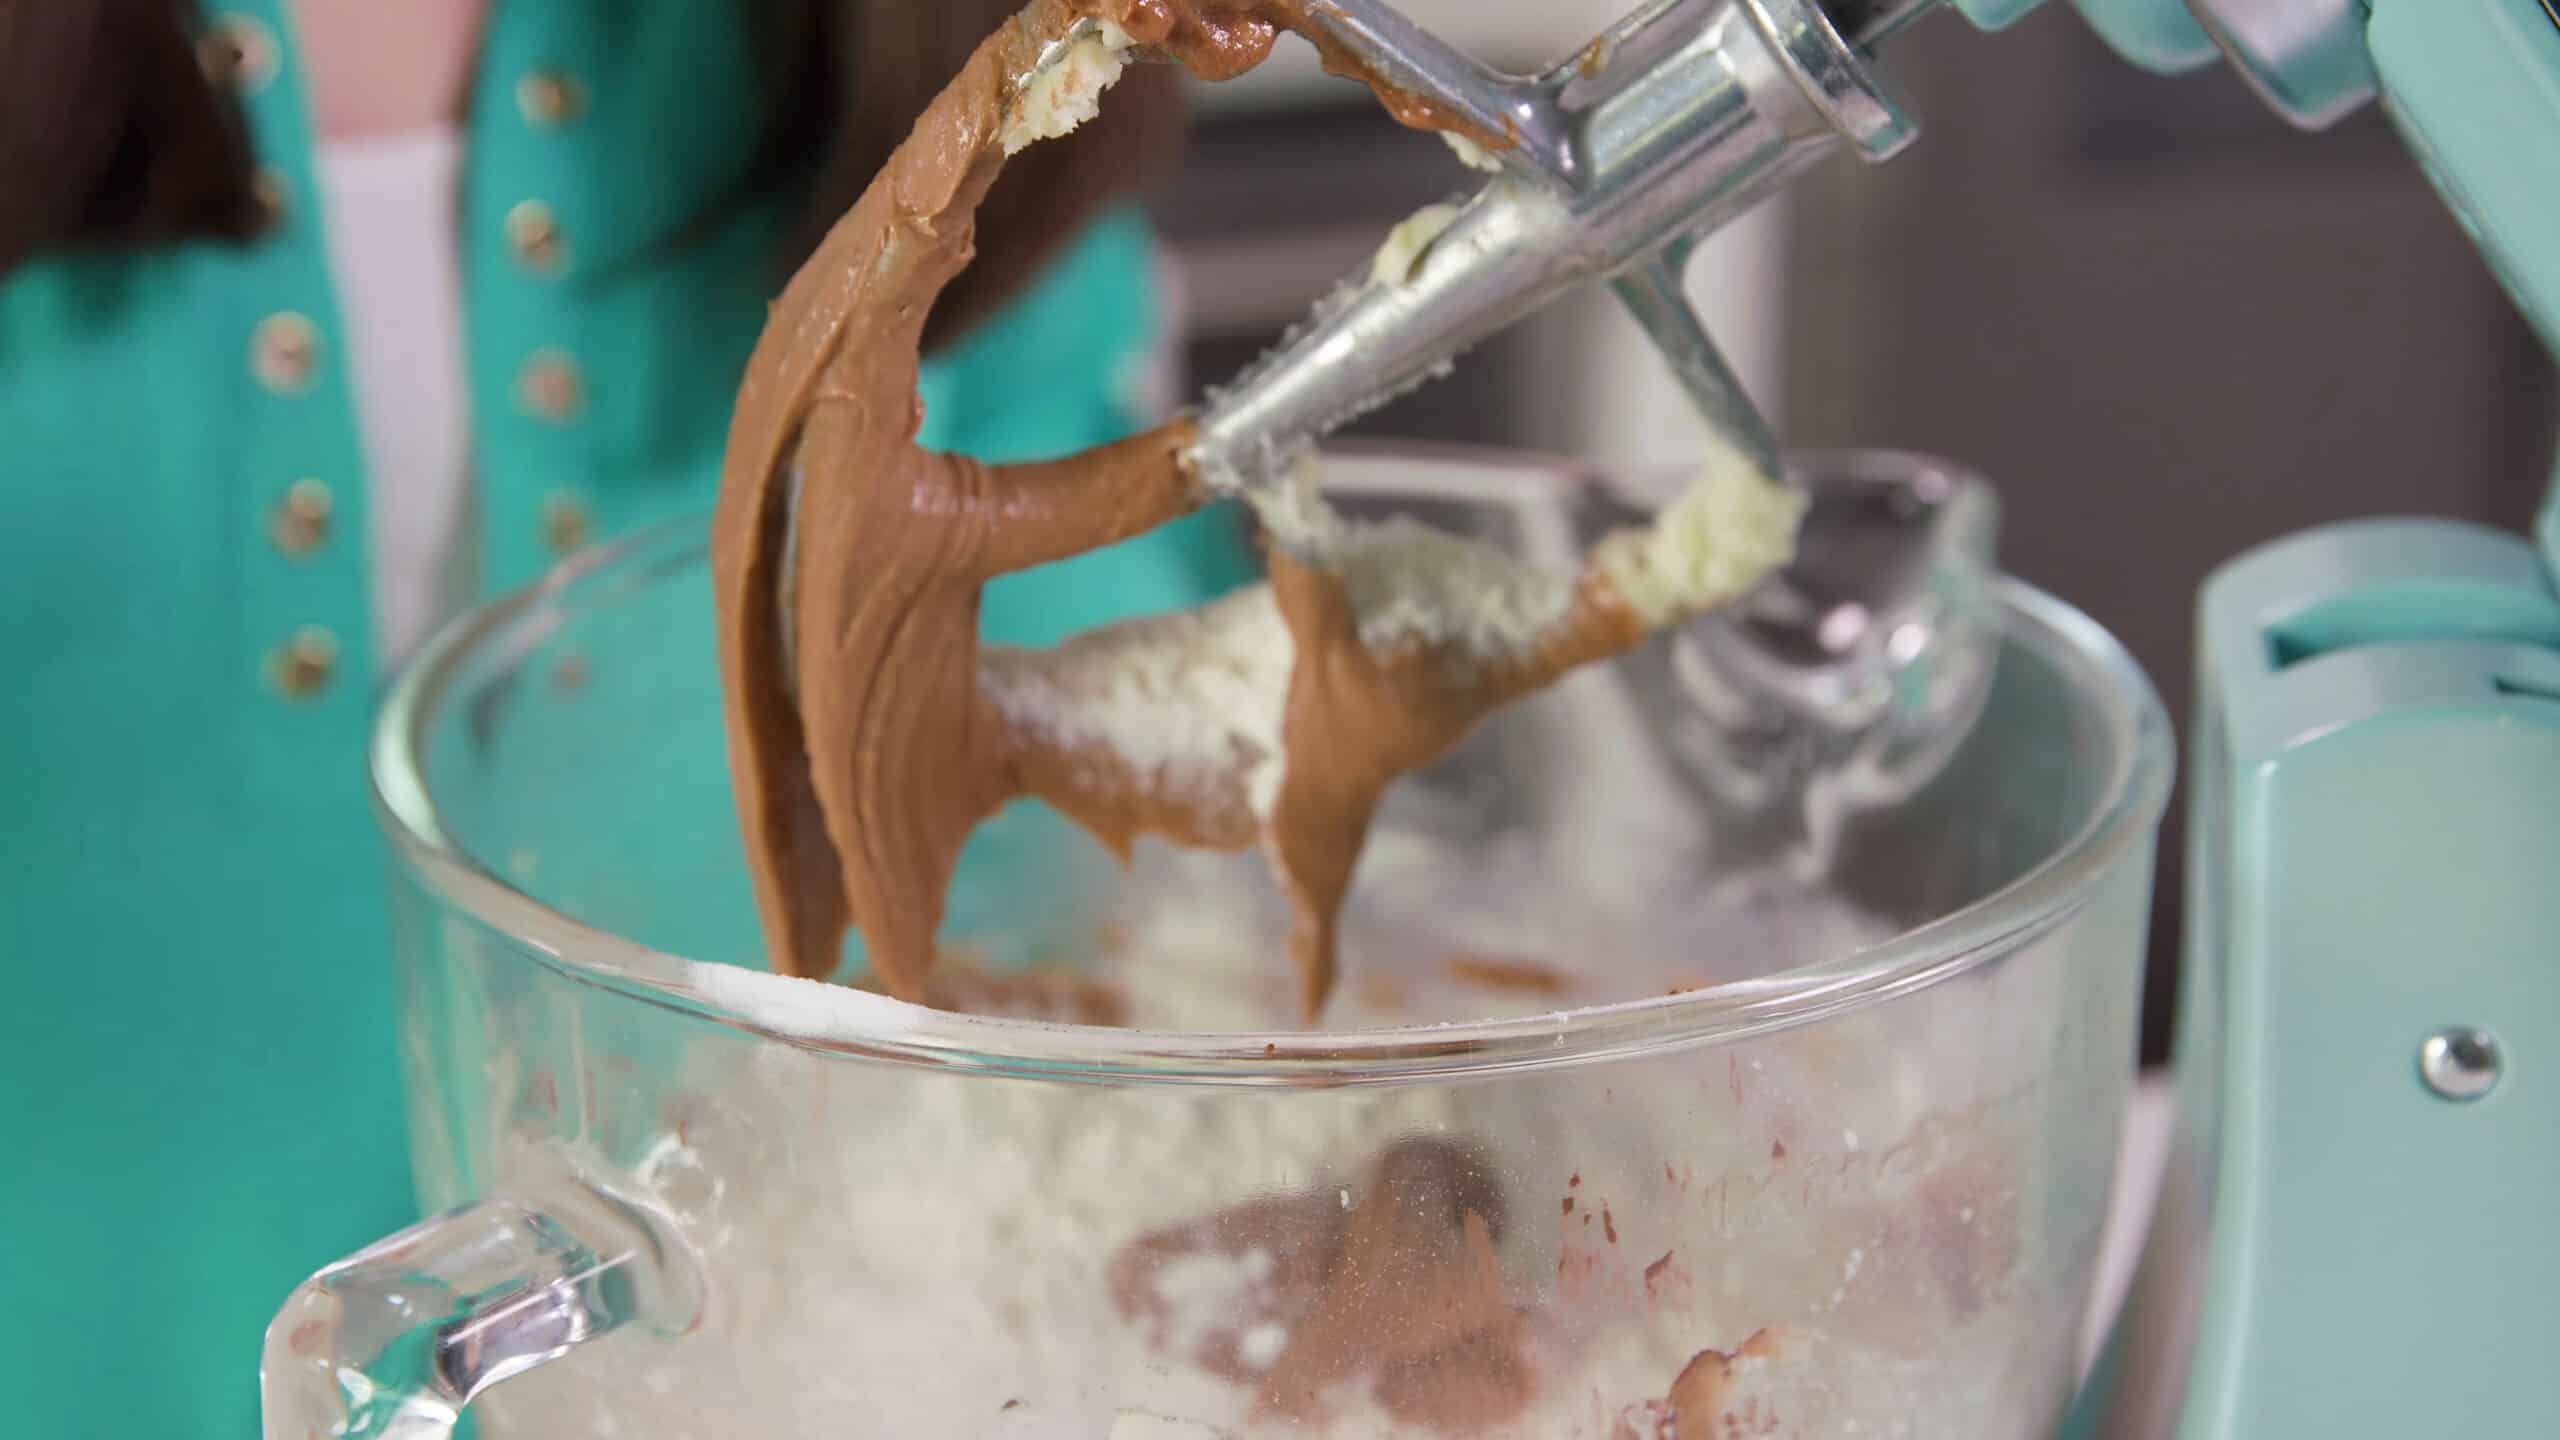 Angled view of metal paddle attachment from a countertop stand mixer with chocolate and butter mixture combined in a large clear glass mixing bowl.